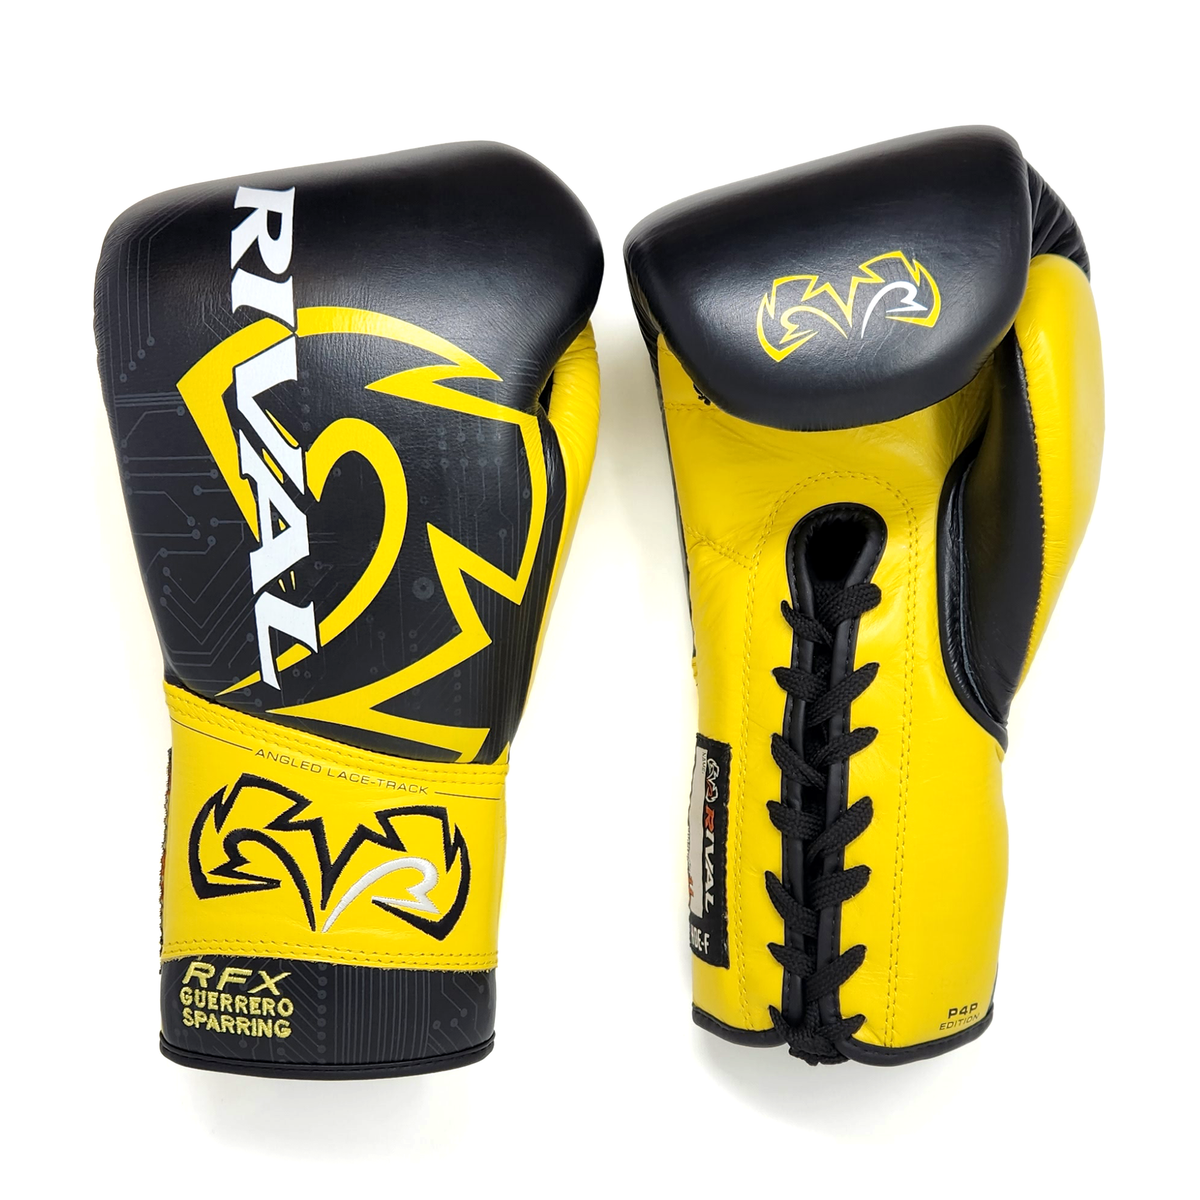 USA Rival RFX-Guerrero Sparring Rival Boxing – Gear Edition P4P Gloves